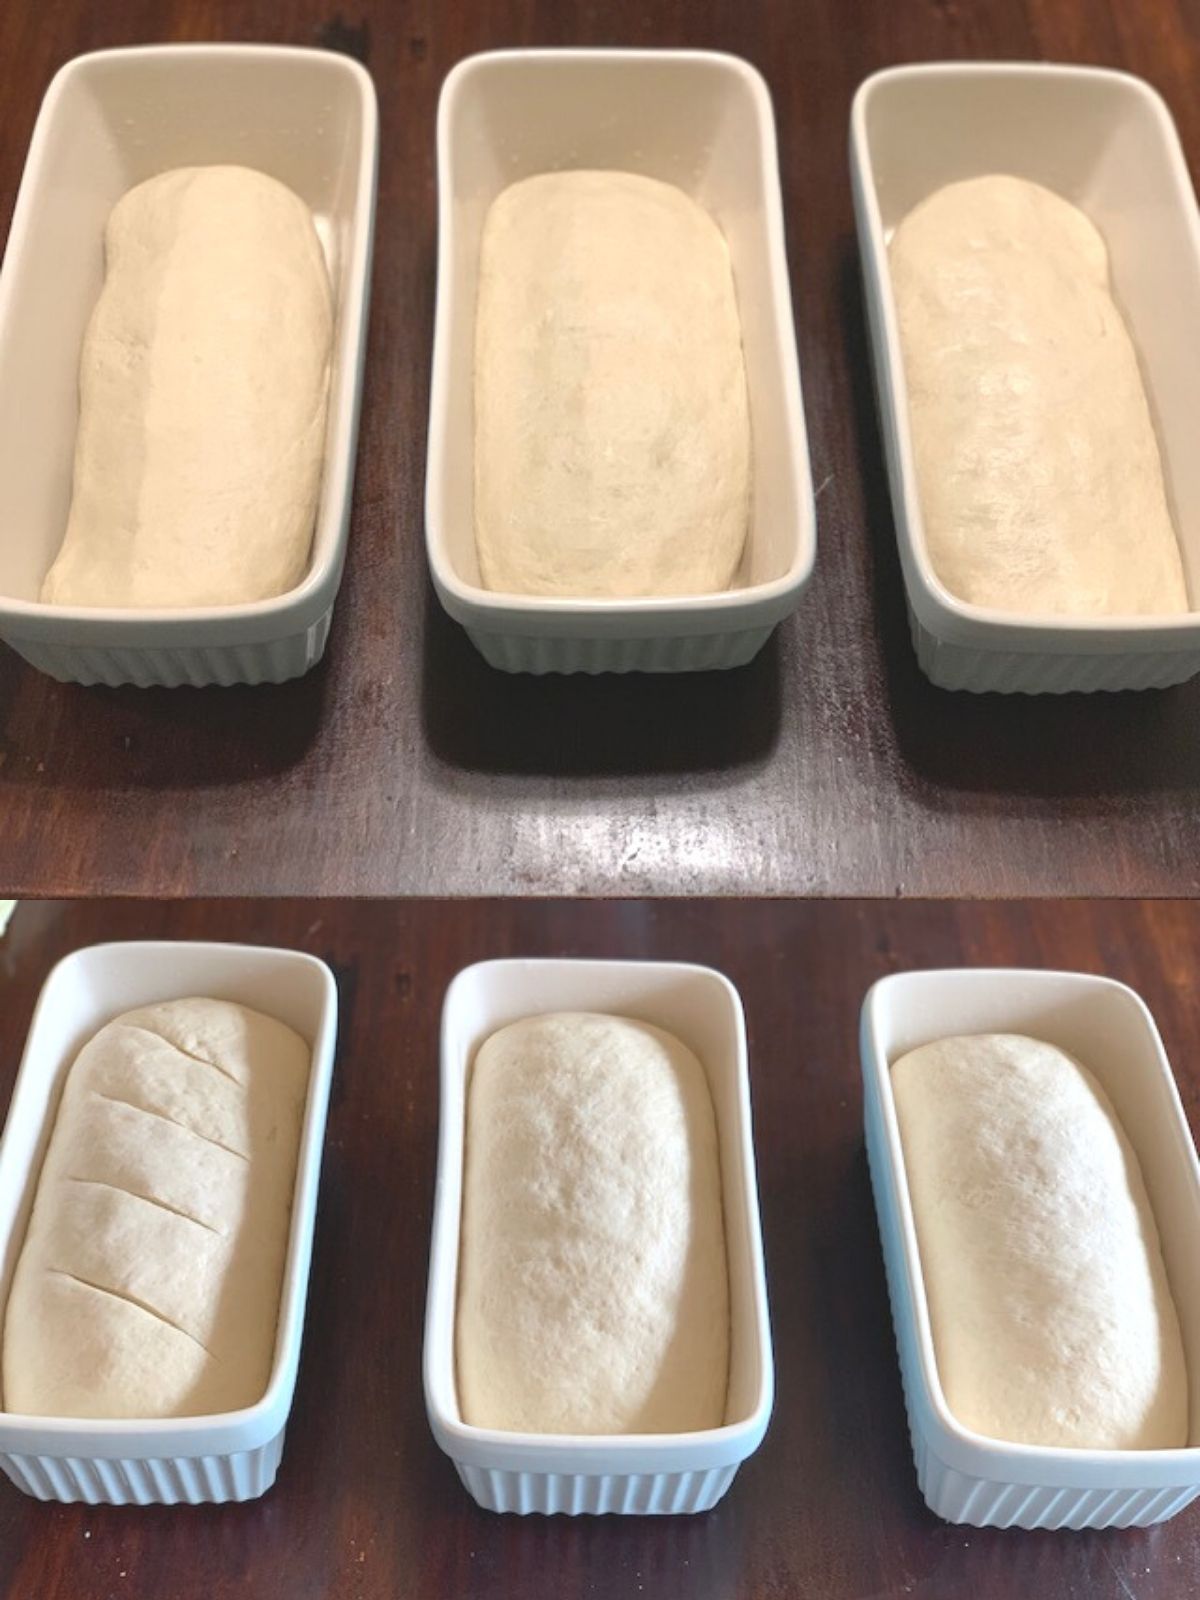 Two photos on top of each other. Photo on top of three shaped bread dough loaves in light blue bread pans ready for their second rise. The second photo shows the loaves after the dough has risen.